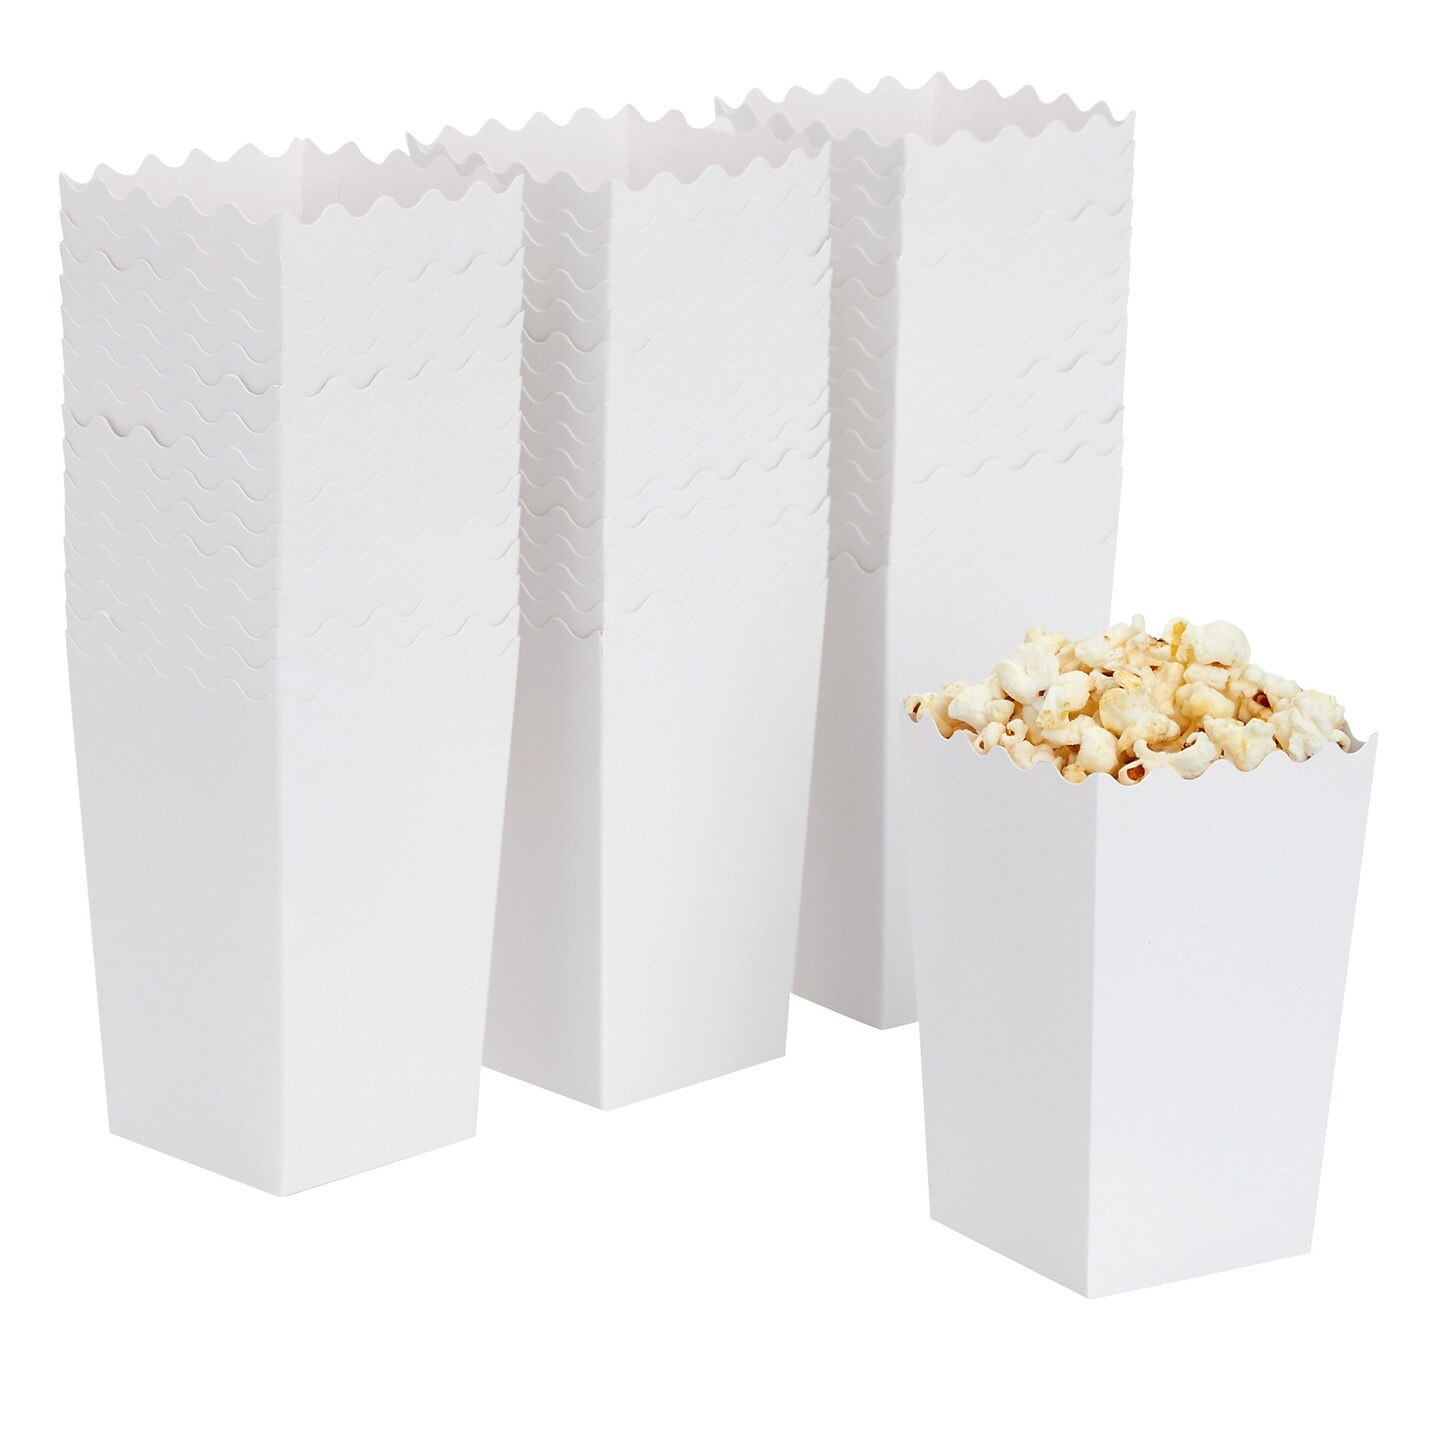 100 Pack White Popcorn Boxes for Party, Bulk Paper Treat Containers for Movie Night Decorations (3.3 x 5.5 x 3.5 In)